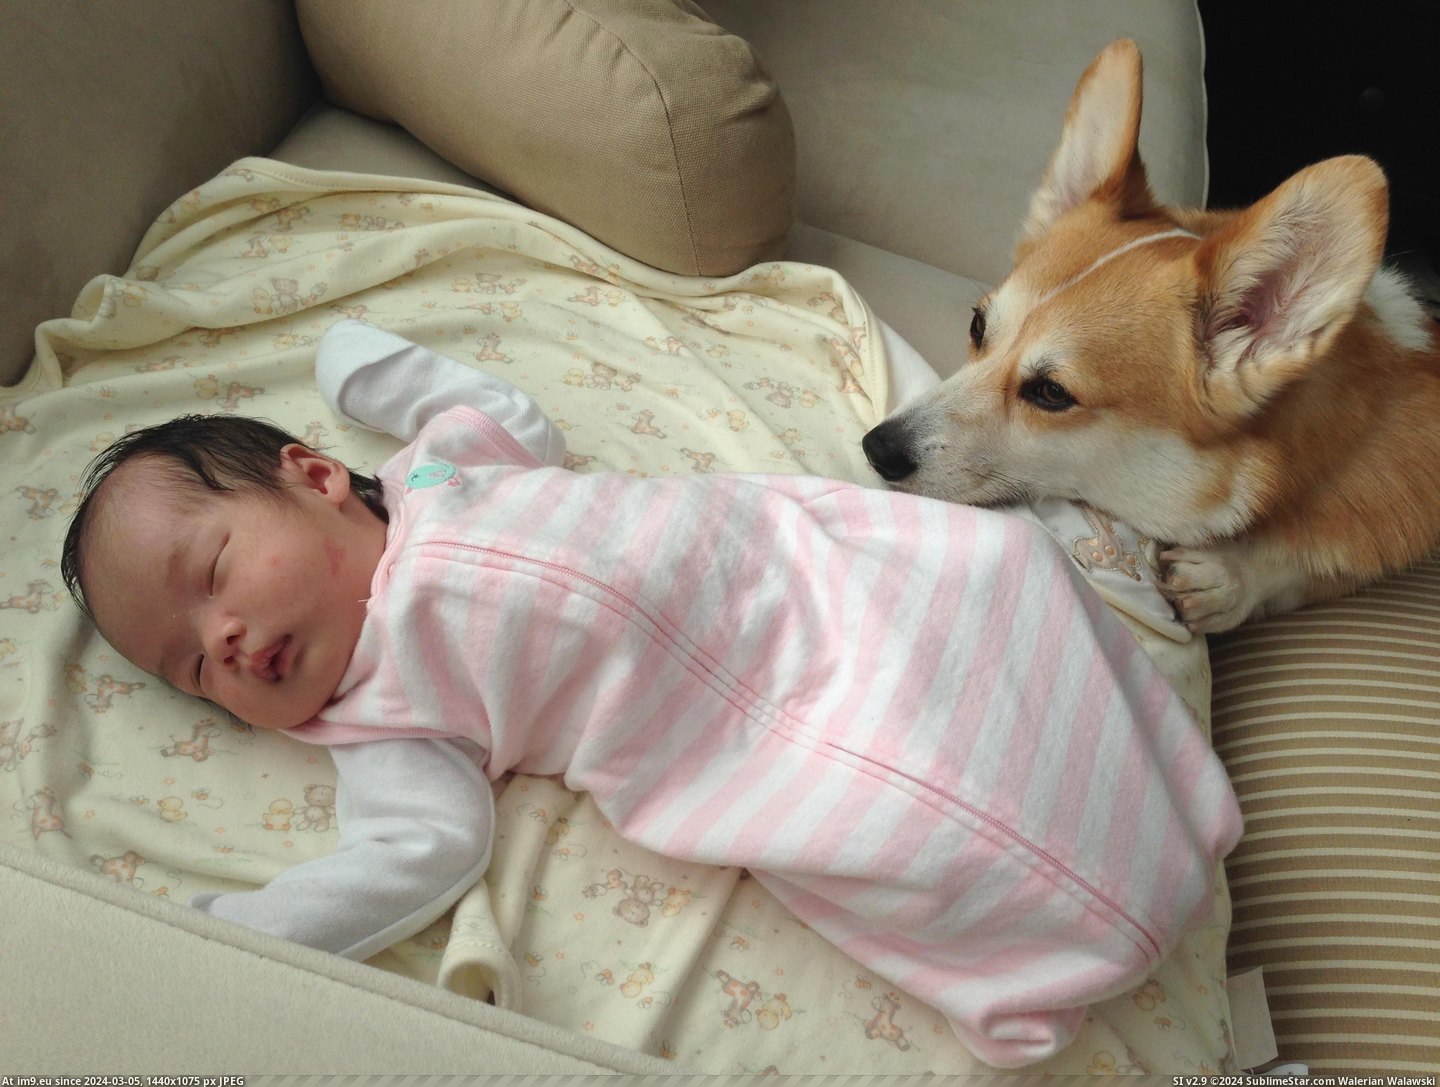 #Was #New #Ago #But #How #Daughter #Weeks #Born [Aww] My daughter was born three weeks ago. I worried about how my corgi would react but he's treating her like his new BFF... 3 Pic. (Image of album My r/AWW favs))